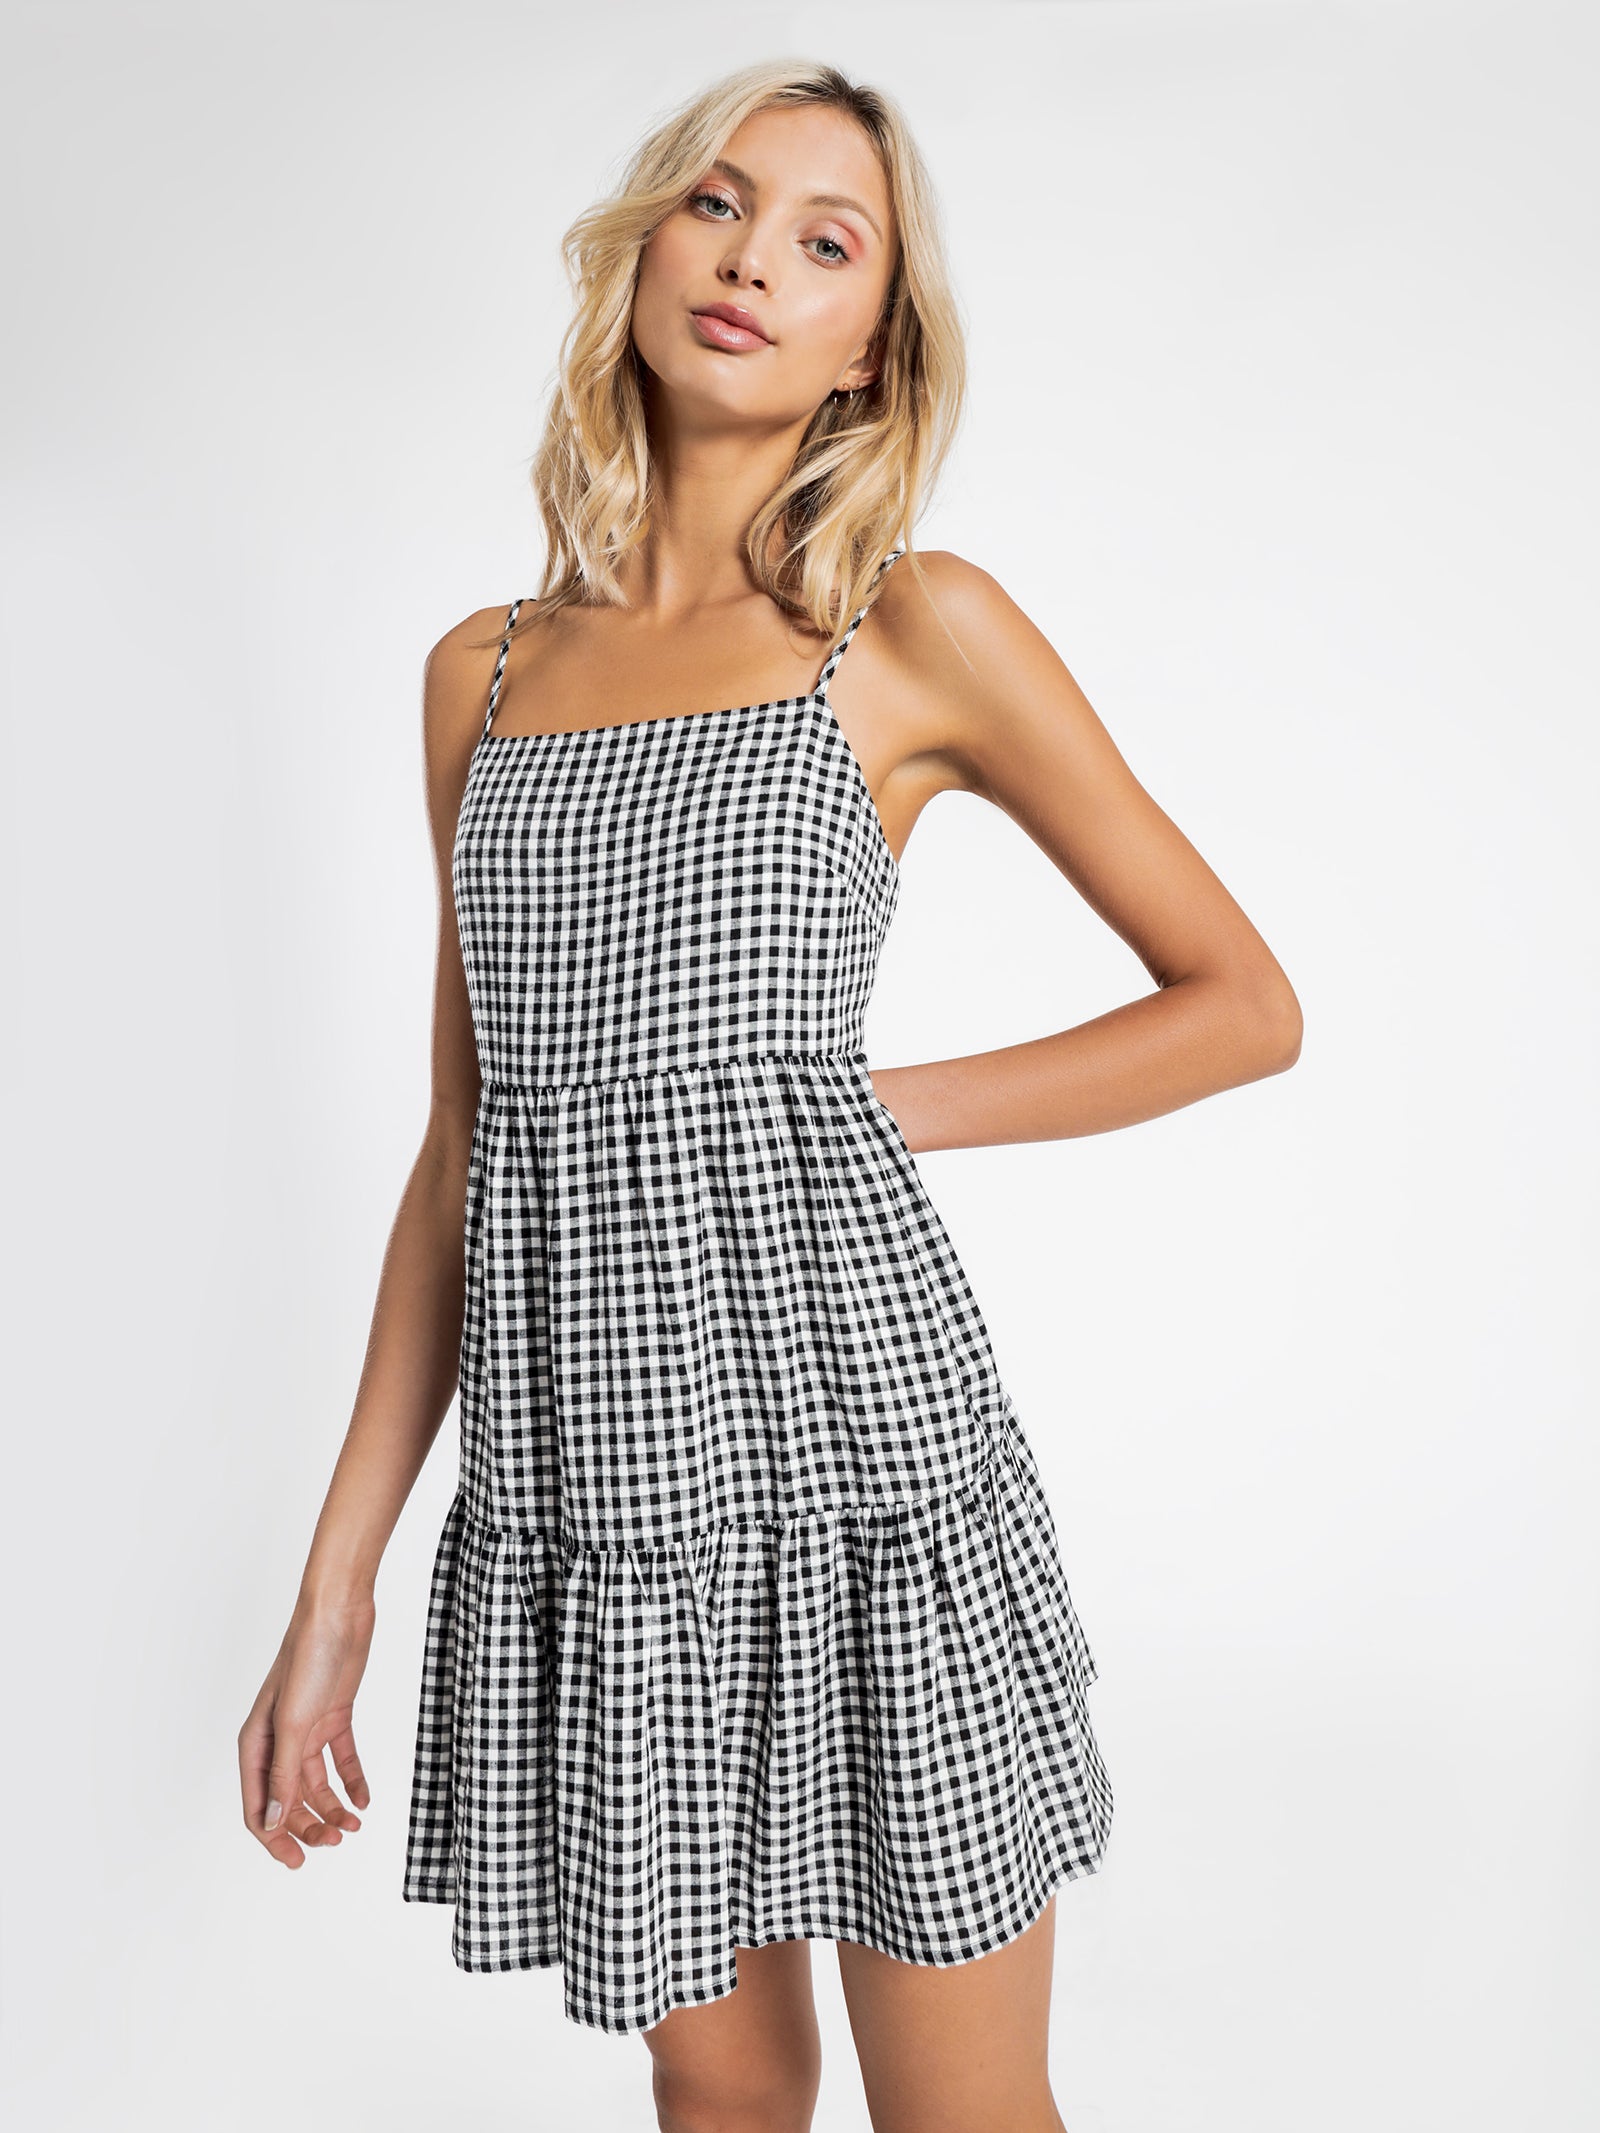 Gingham Tiered Dress in Black & White